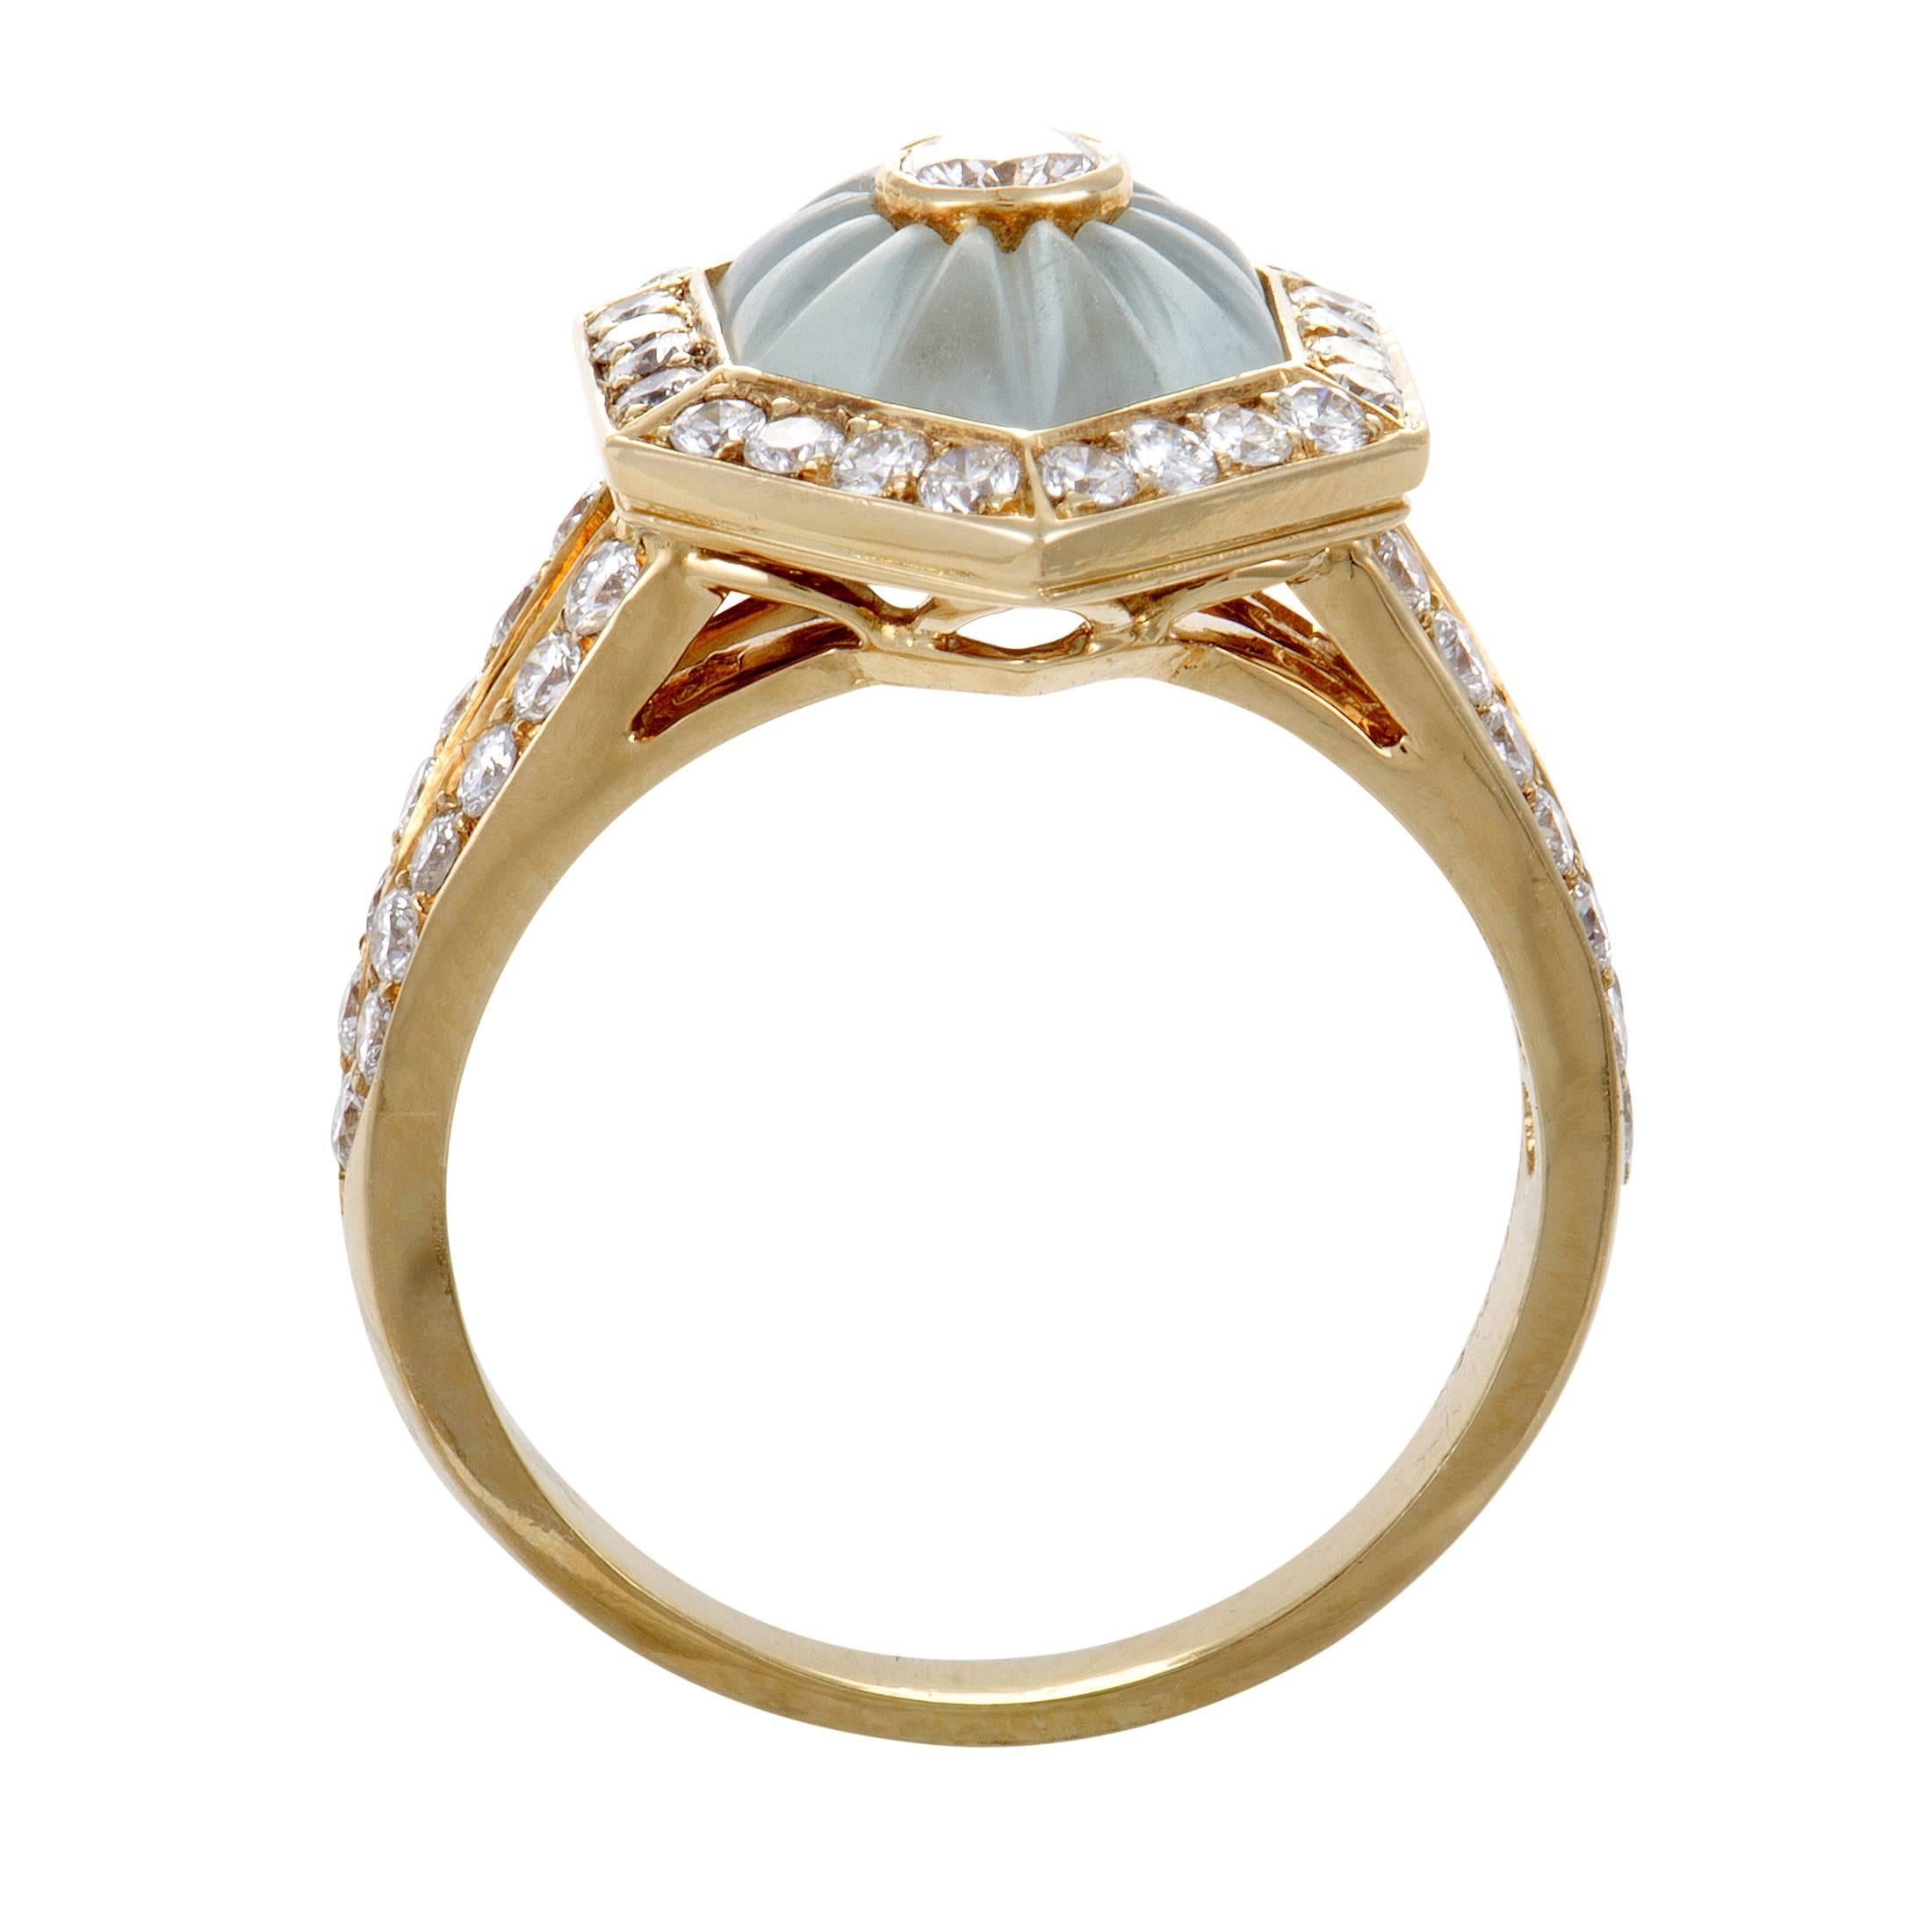 Brilliantly contrasting the gentle tone and smooth shape of the blue crystal, lustrous diamonds weighing in total approximately 1.00 carat compel with their dazzling allure in this fascinating 18K yellow gold ring from Boucheron.
Ring Top